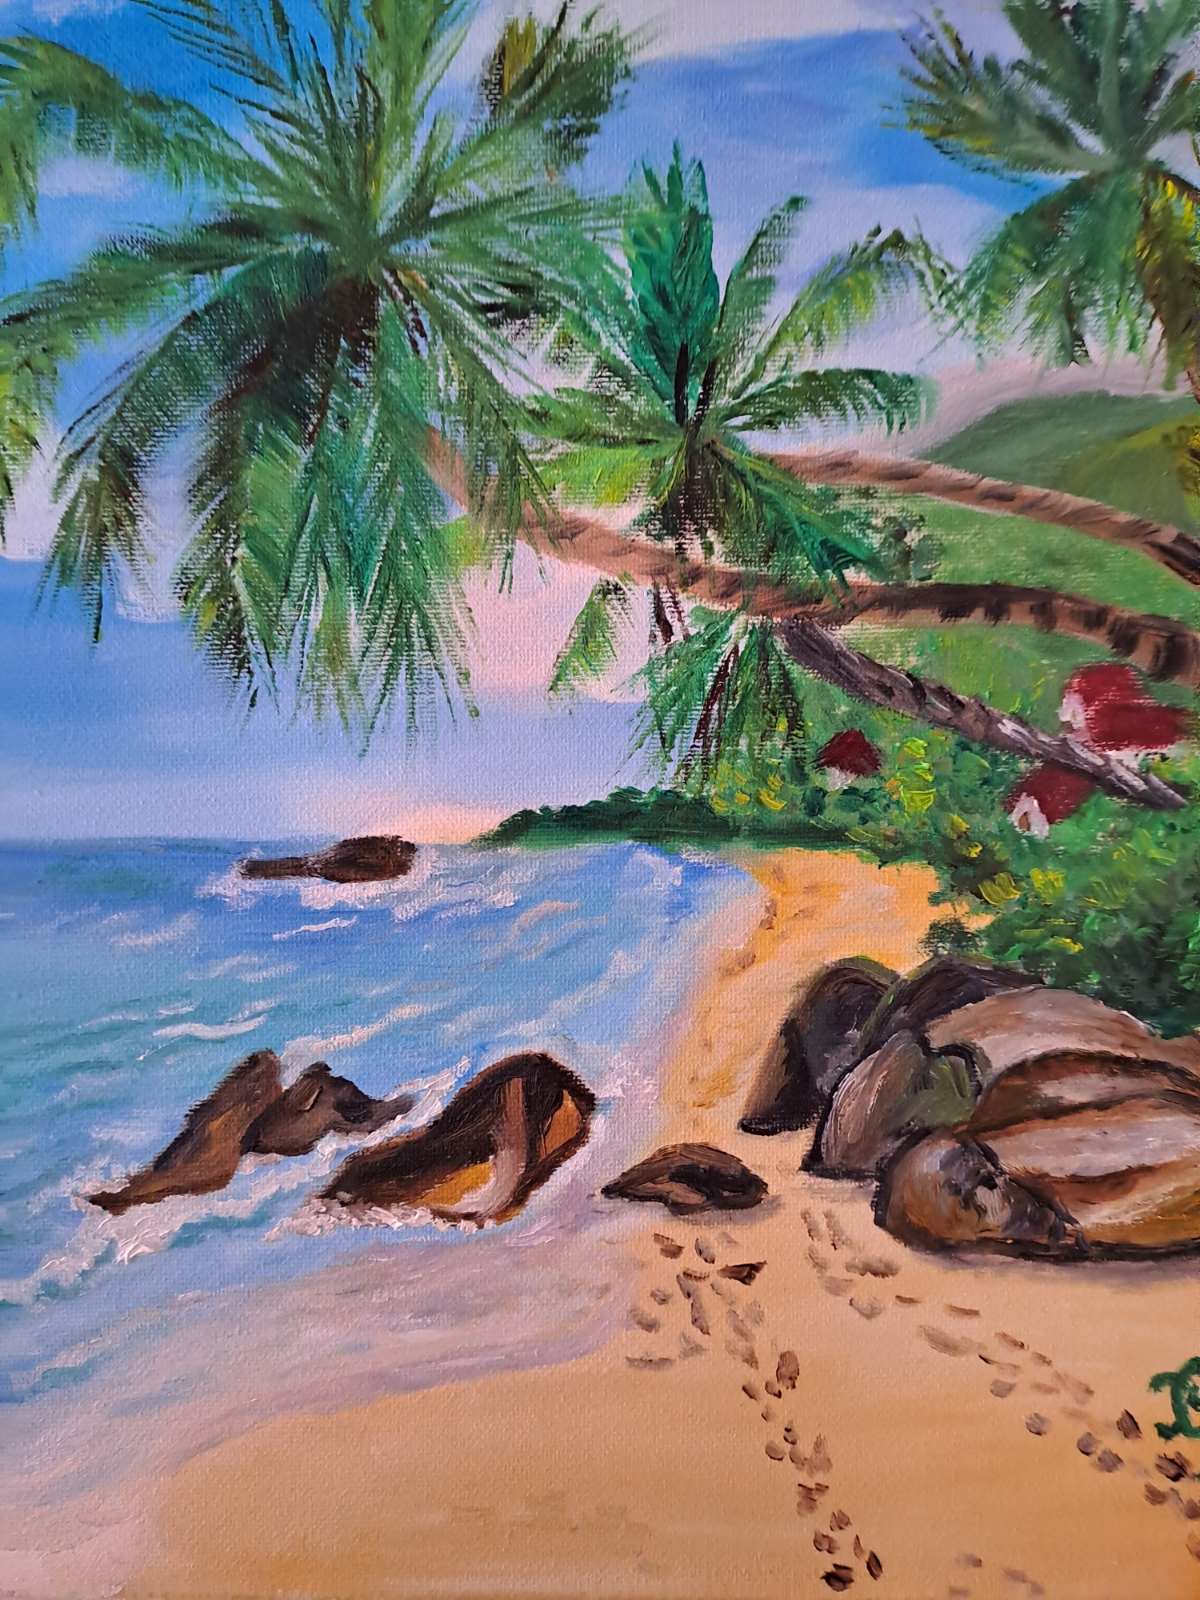 Painting In The Seychelles